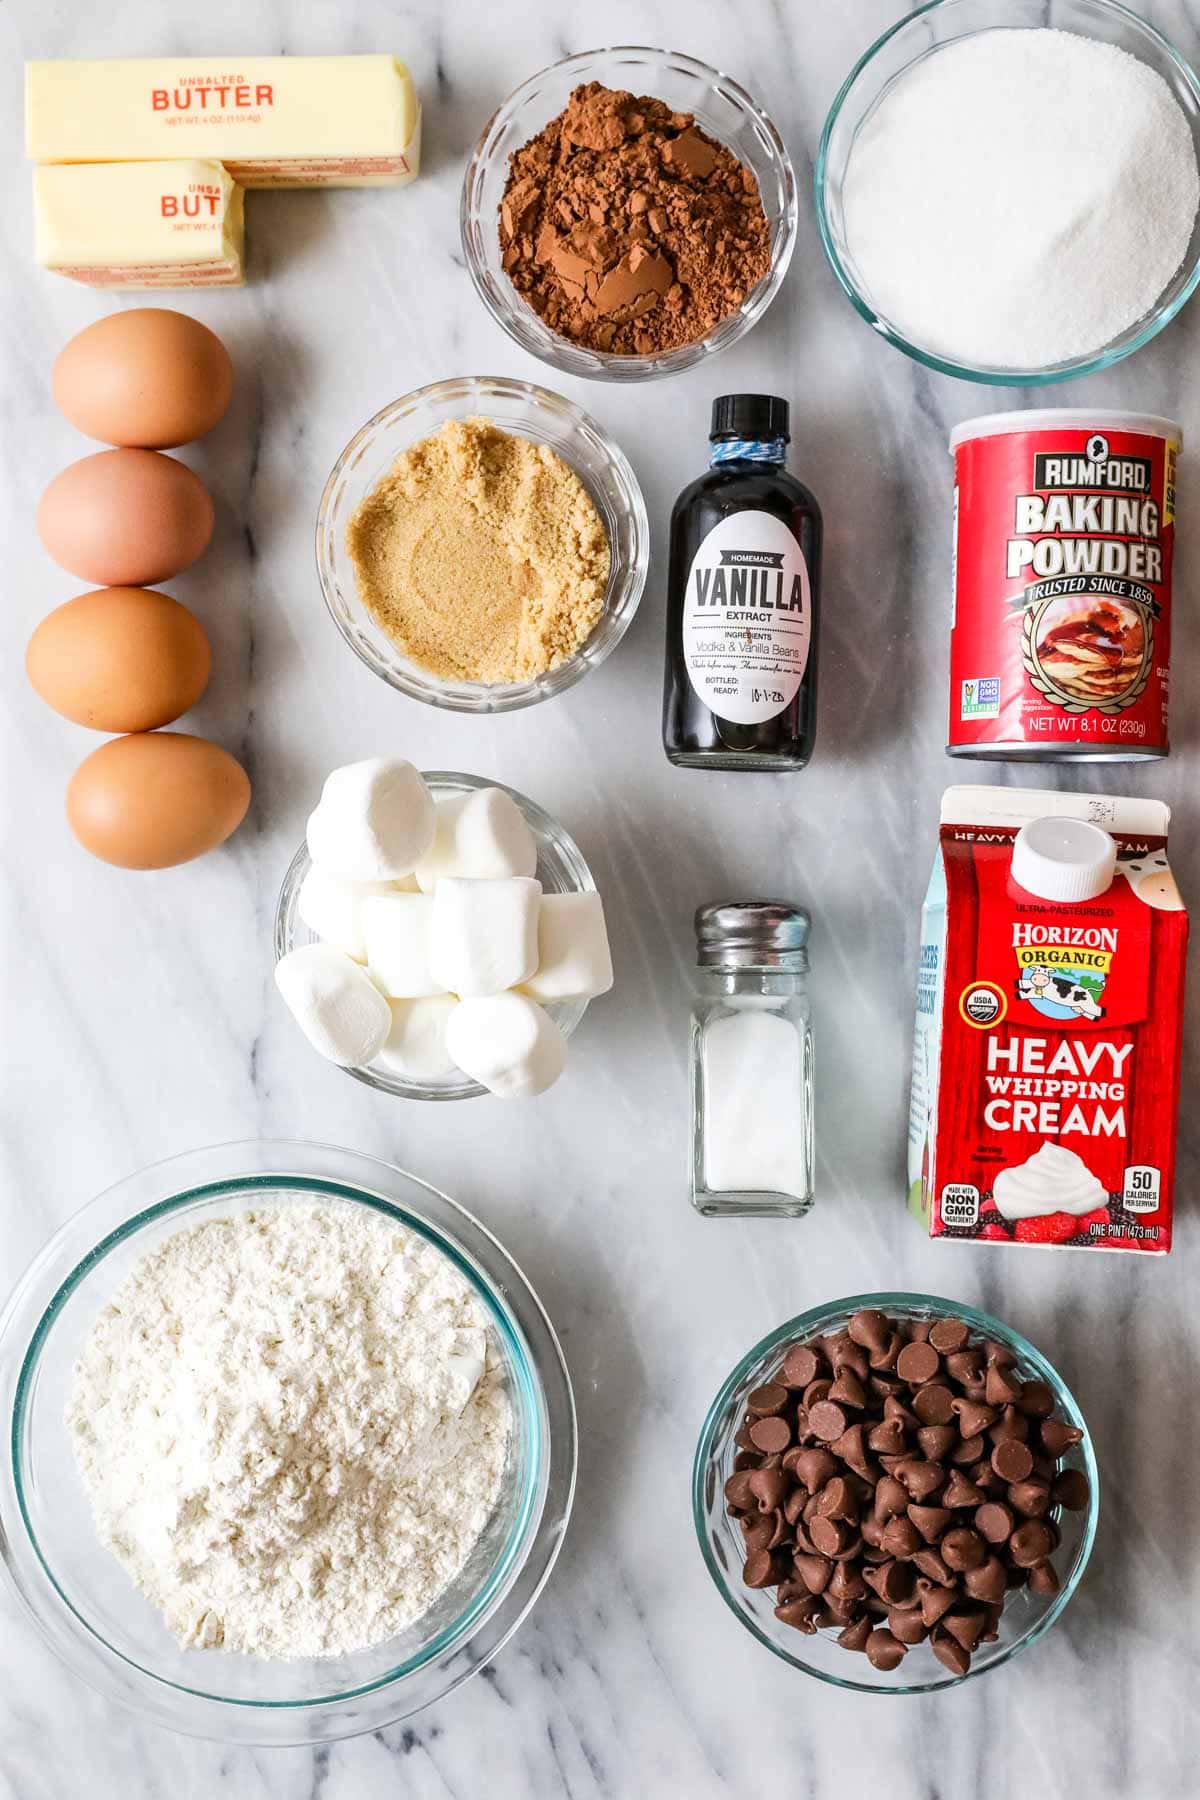 Overhead view of ingredients including cocoa powder, eggs, chocolate chips, marshmallows, and more.